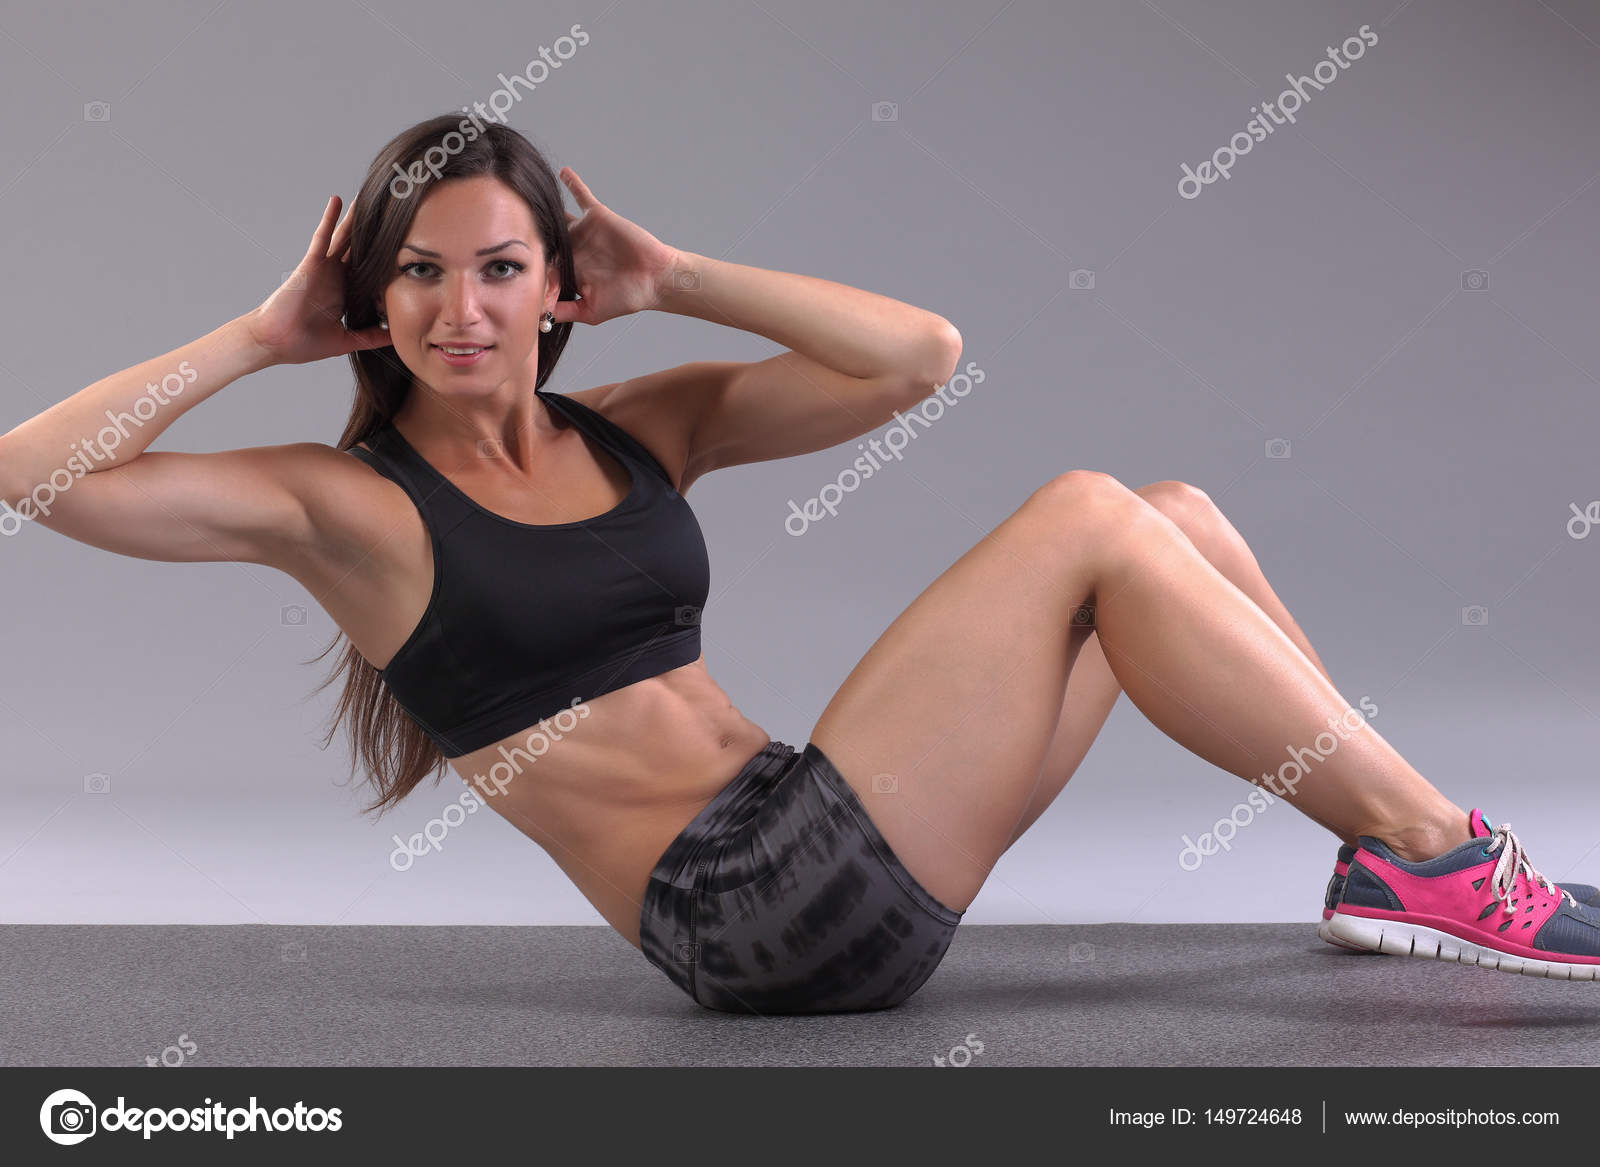 Women Doing Exercise Abdominal Crunches Pumping A Press On Floor